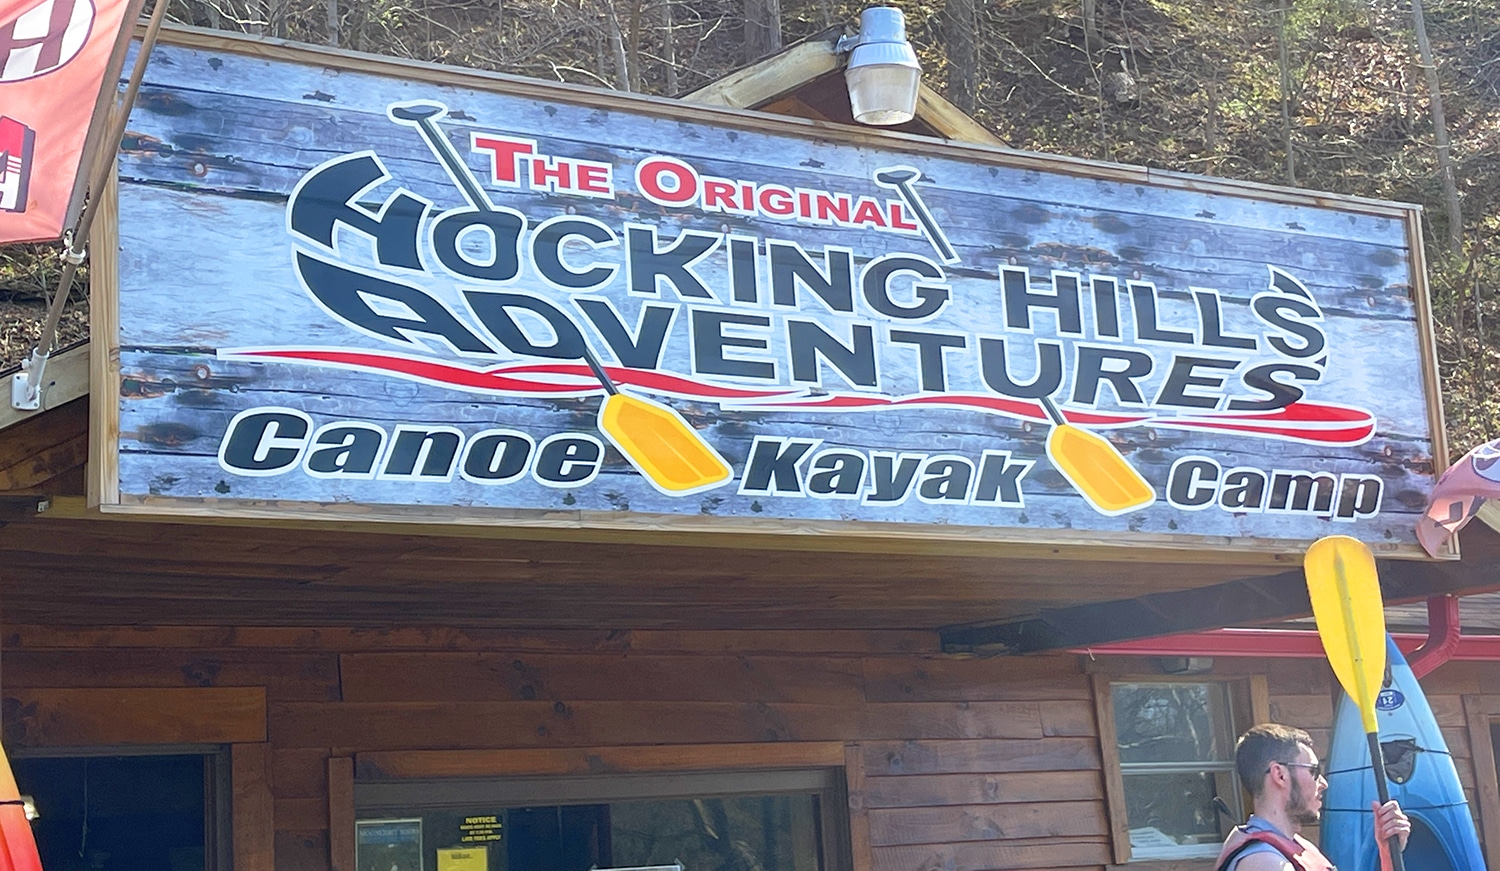 horizontal photo of the sign above the building at Hocking Hills Adventures. Photo credit: Cindy Gordon of VisitOhioToday.com